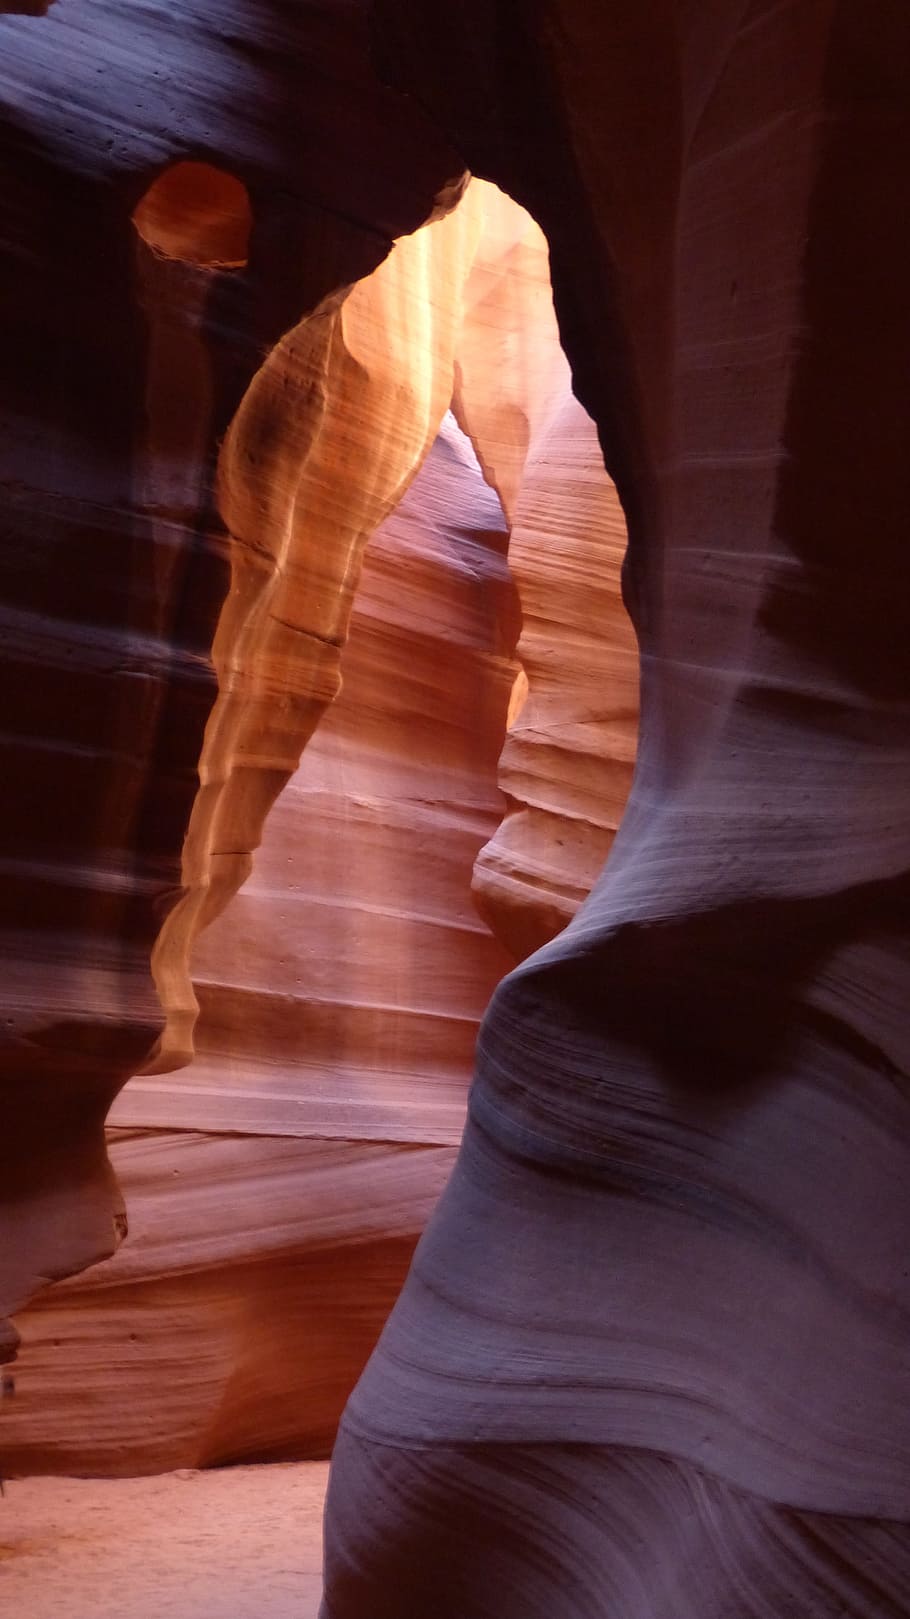 usa national park, antelope canyon, navajo, rock formation, rock, rock - object, beauty in nature, physical geography, solid, canyon